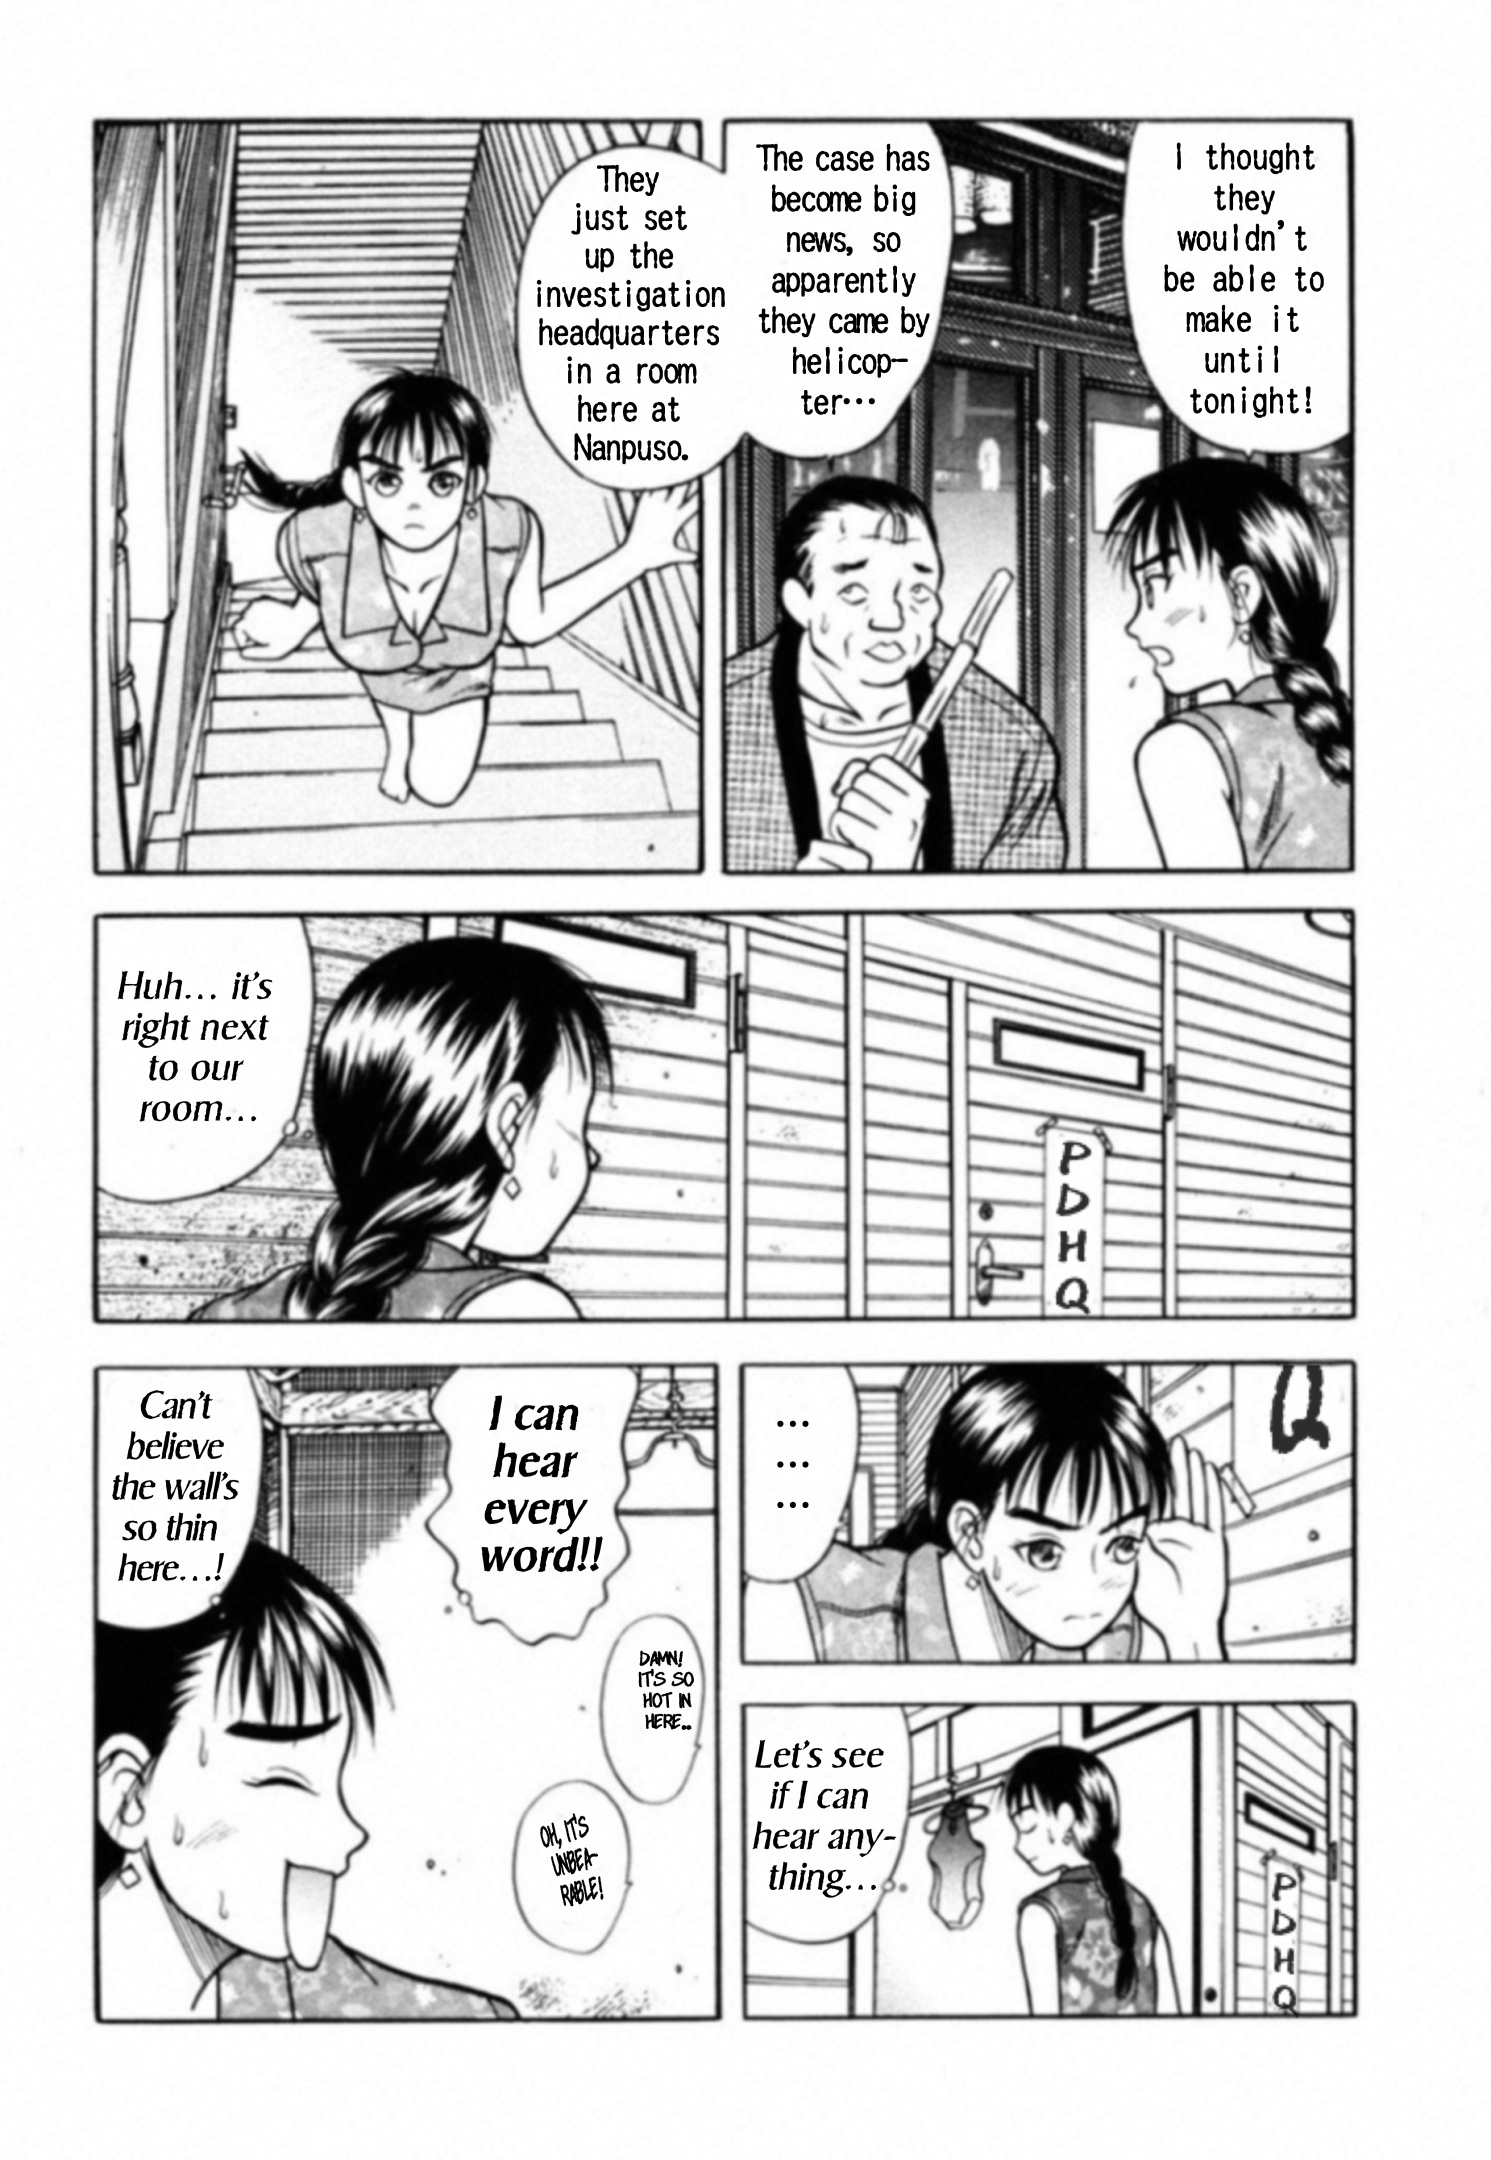 Kakeru Vol.1 Chapter 13: The Island Of Lust - 3 - Picture 2